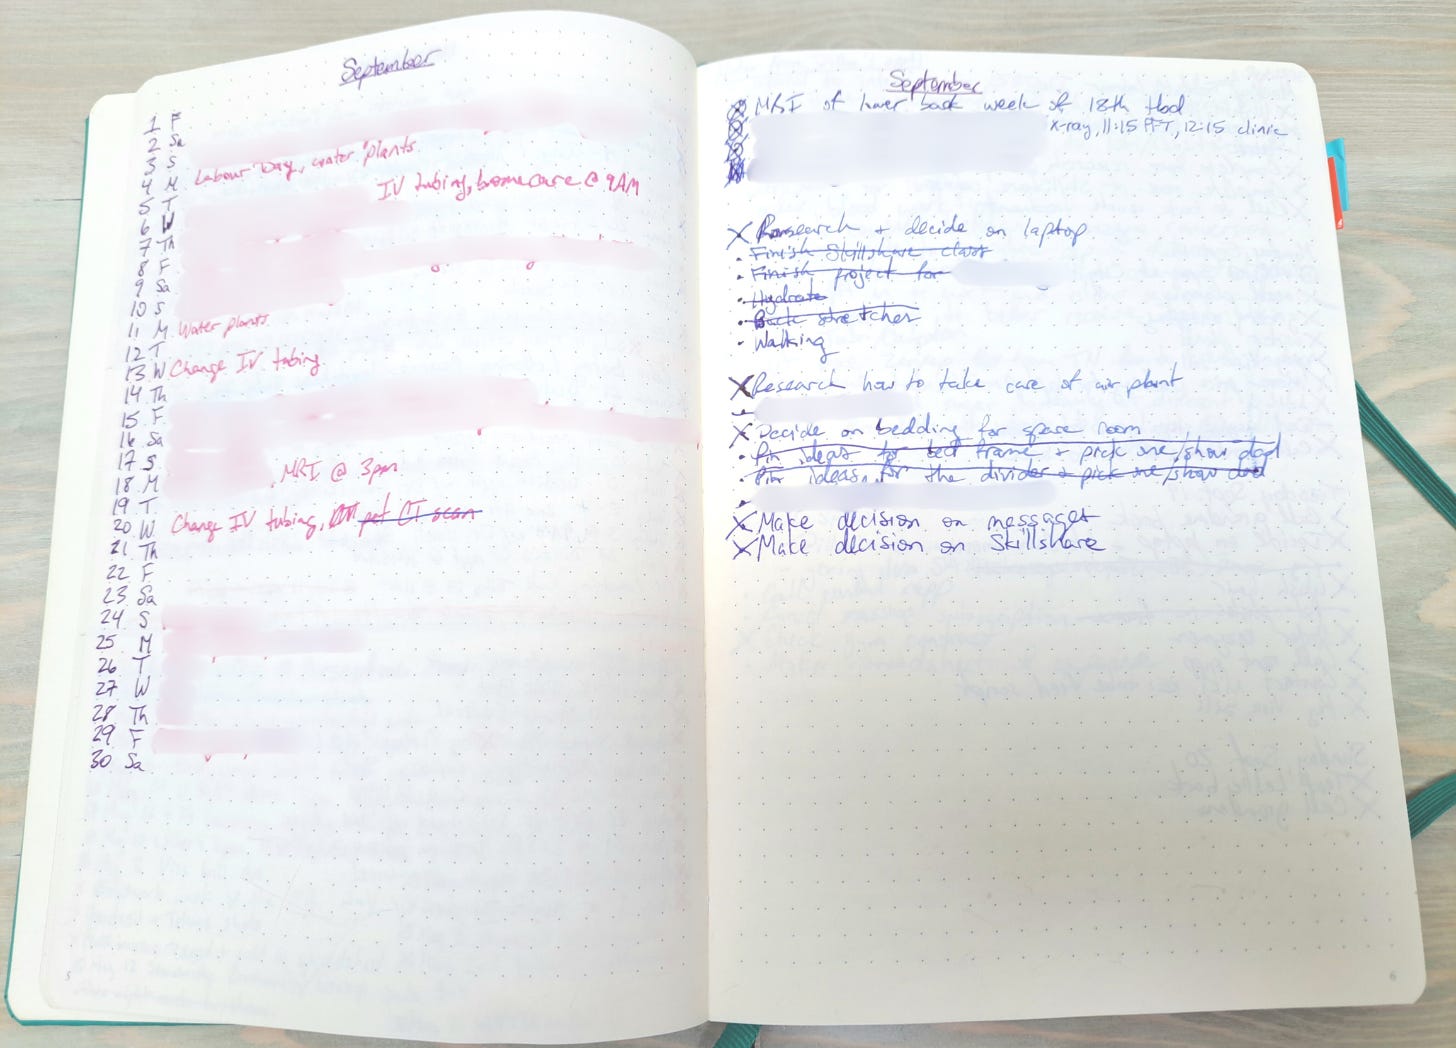 Vertical calendar on left page of notebook with to-do list on right page.